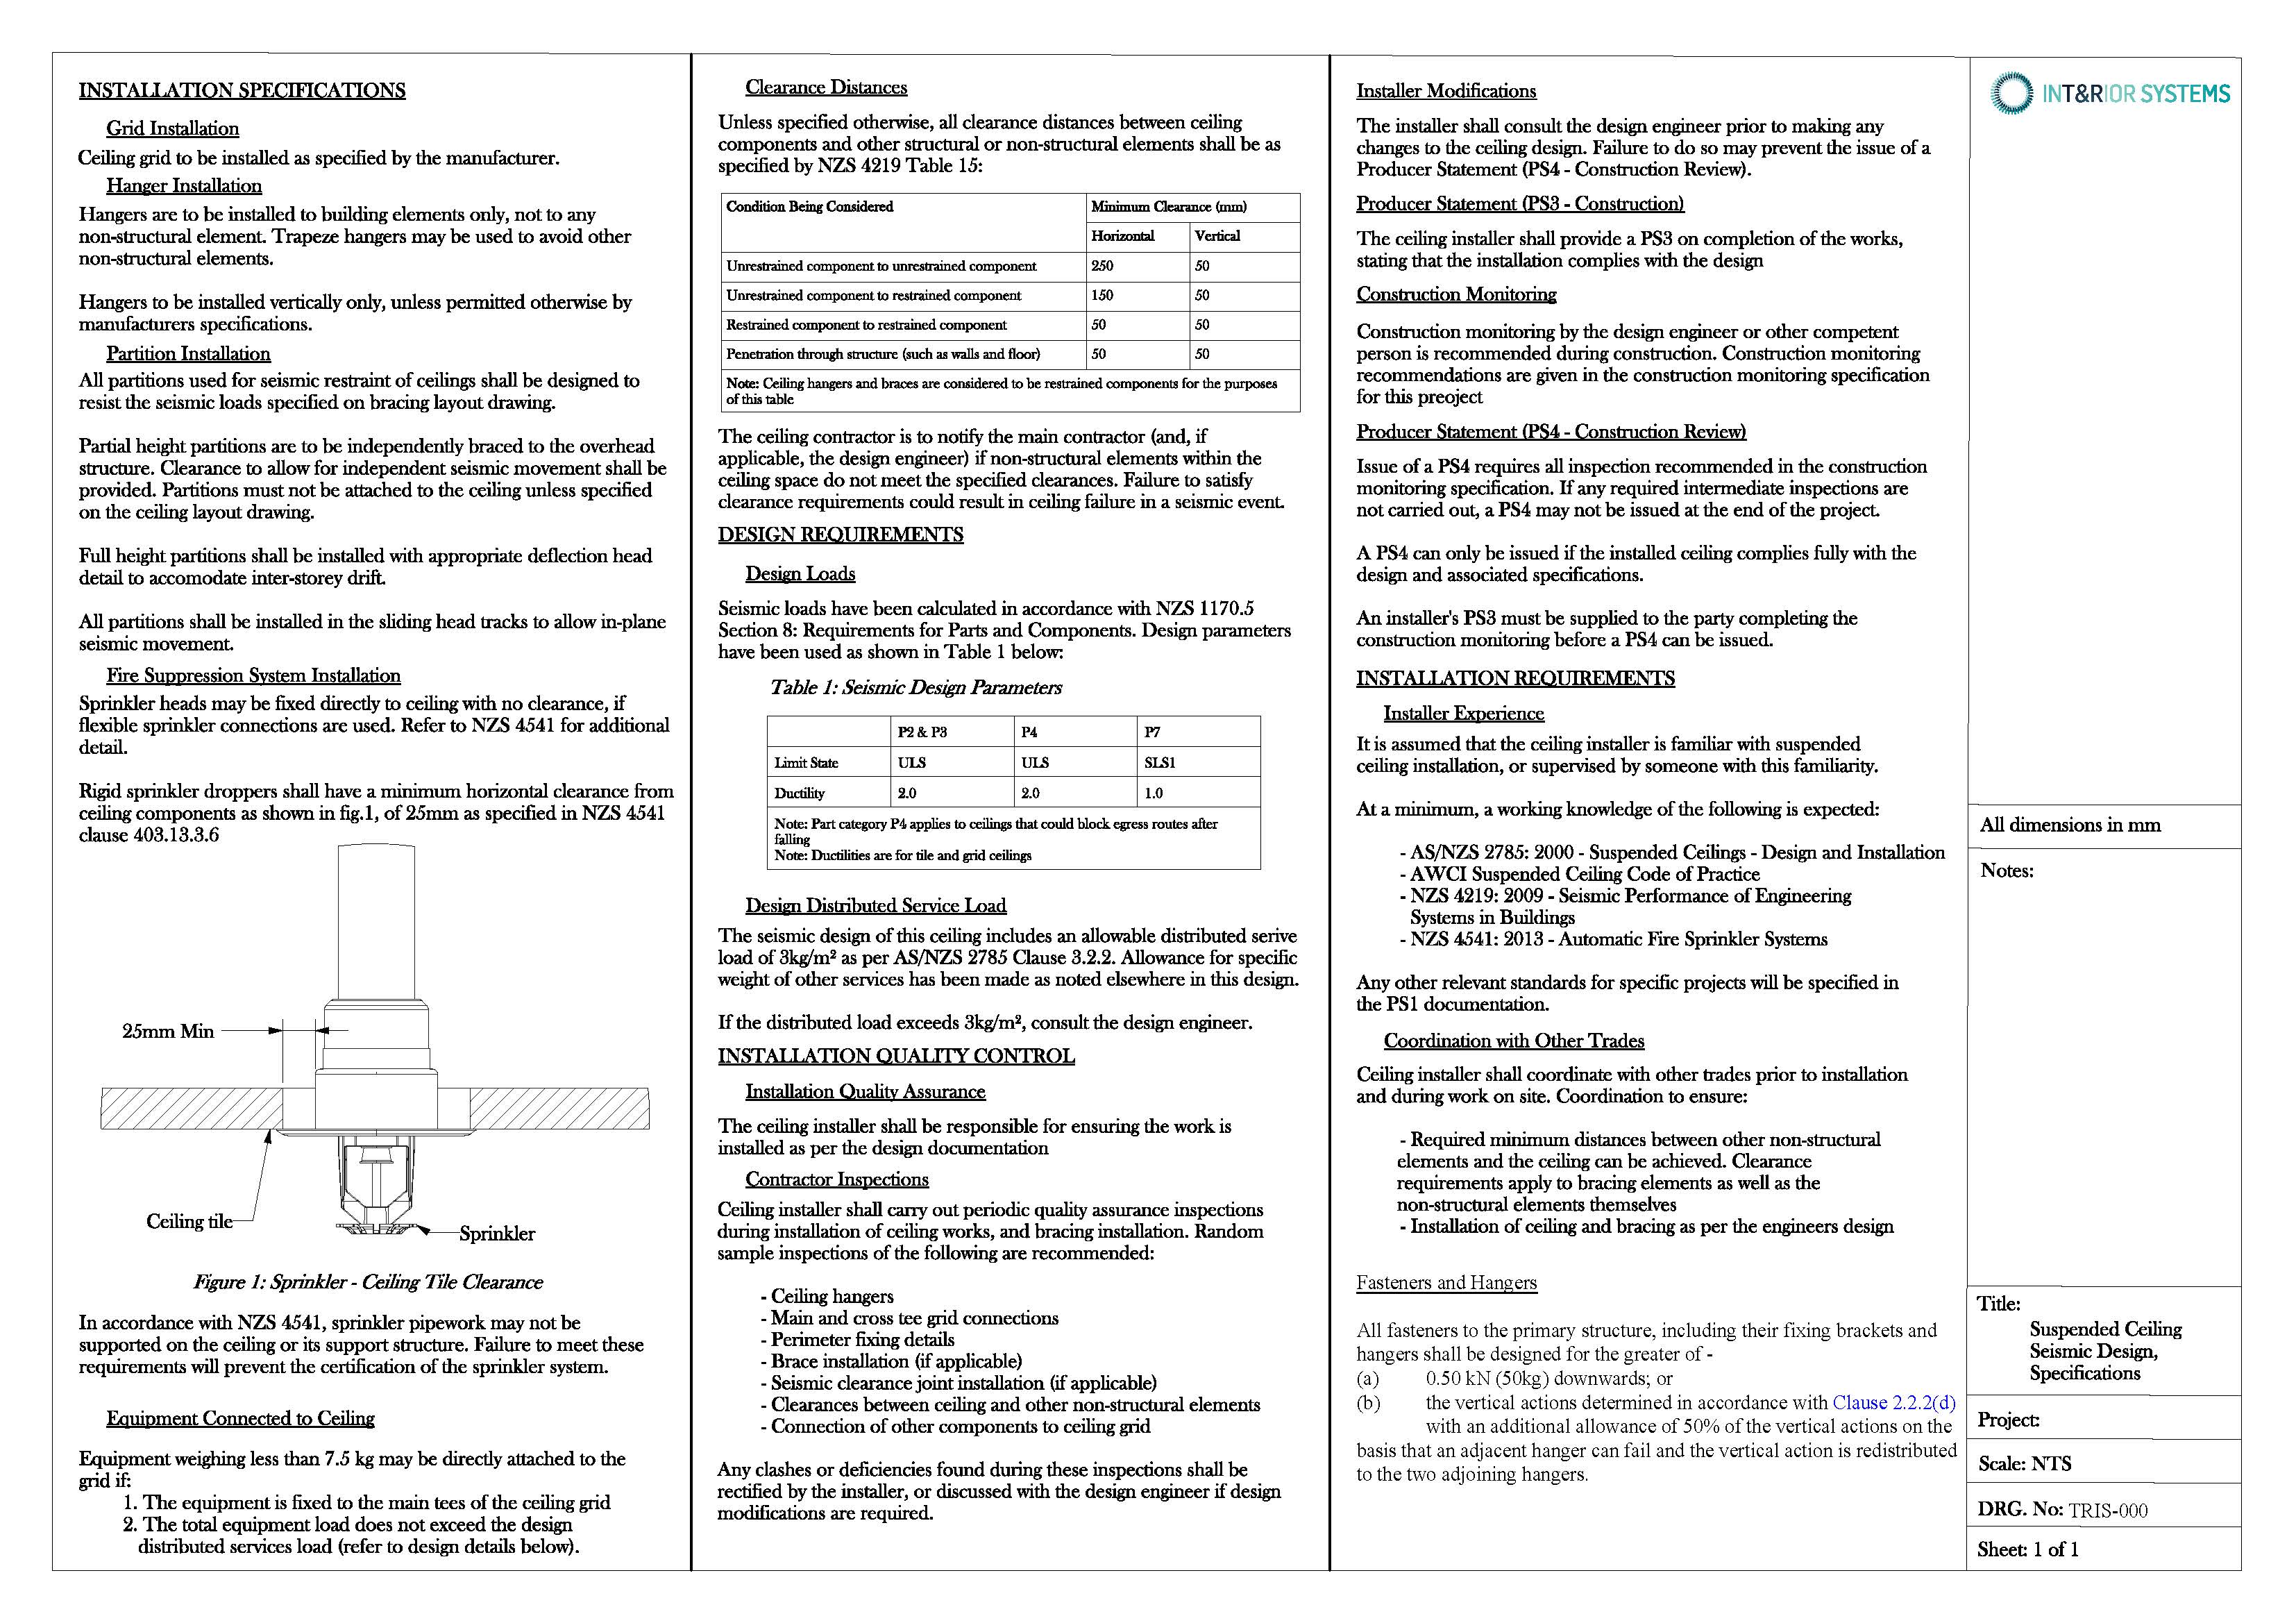 TRIS000 Specification Sheet